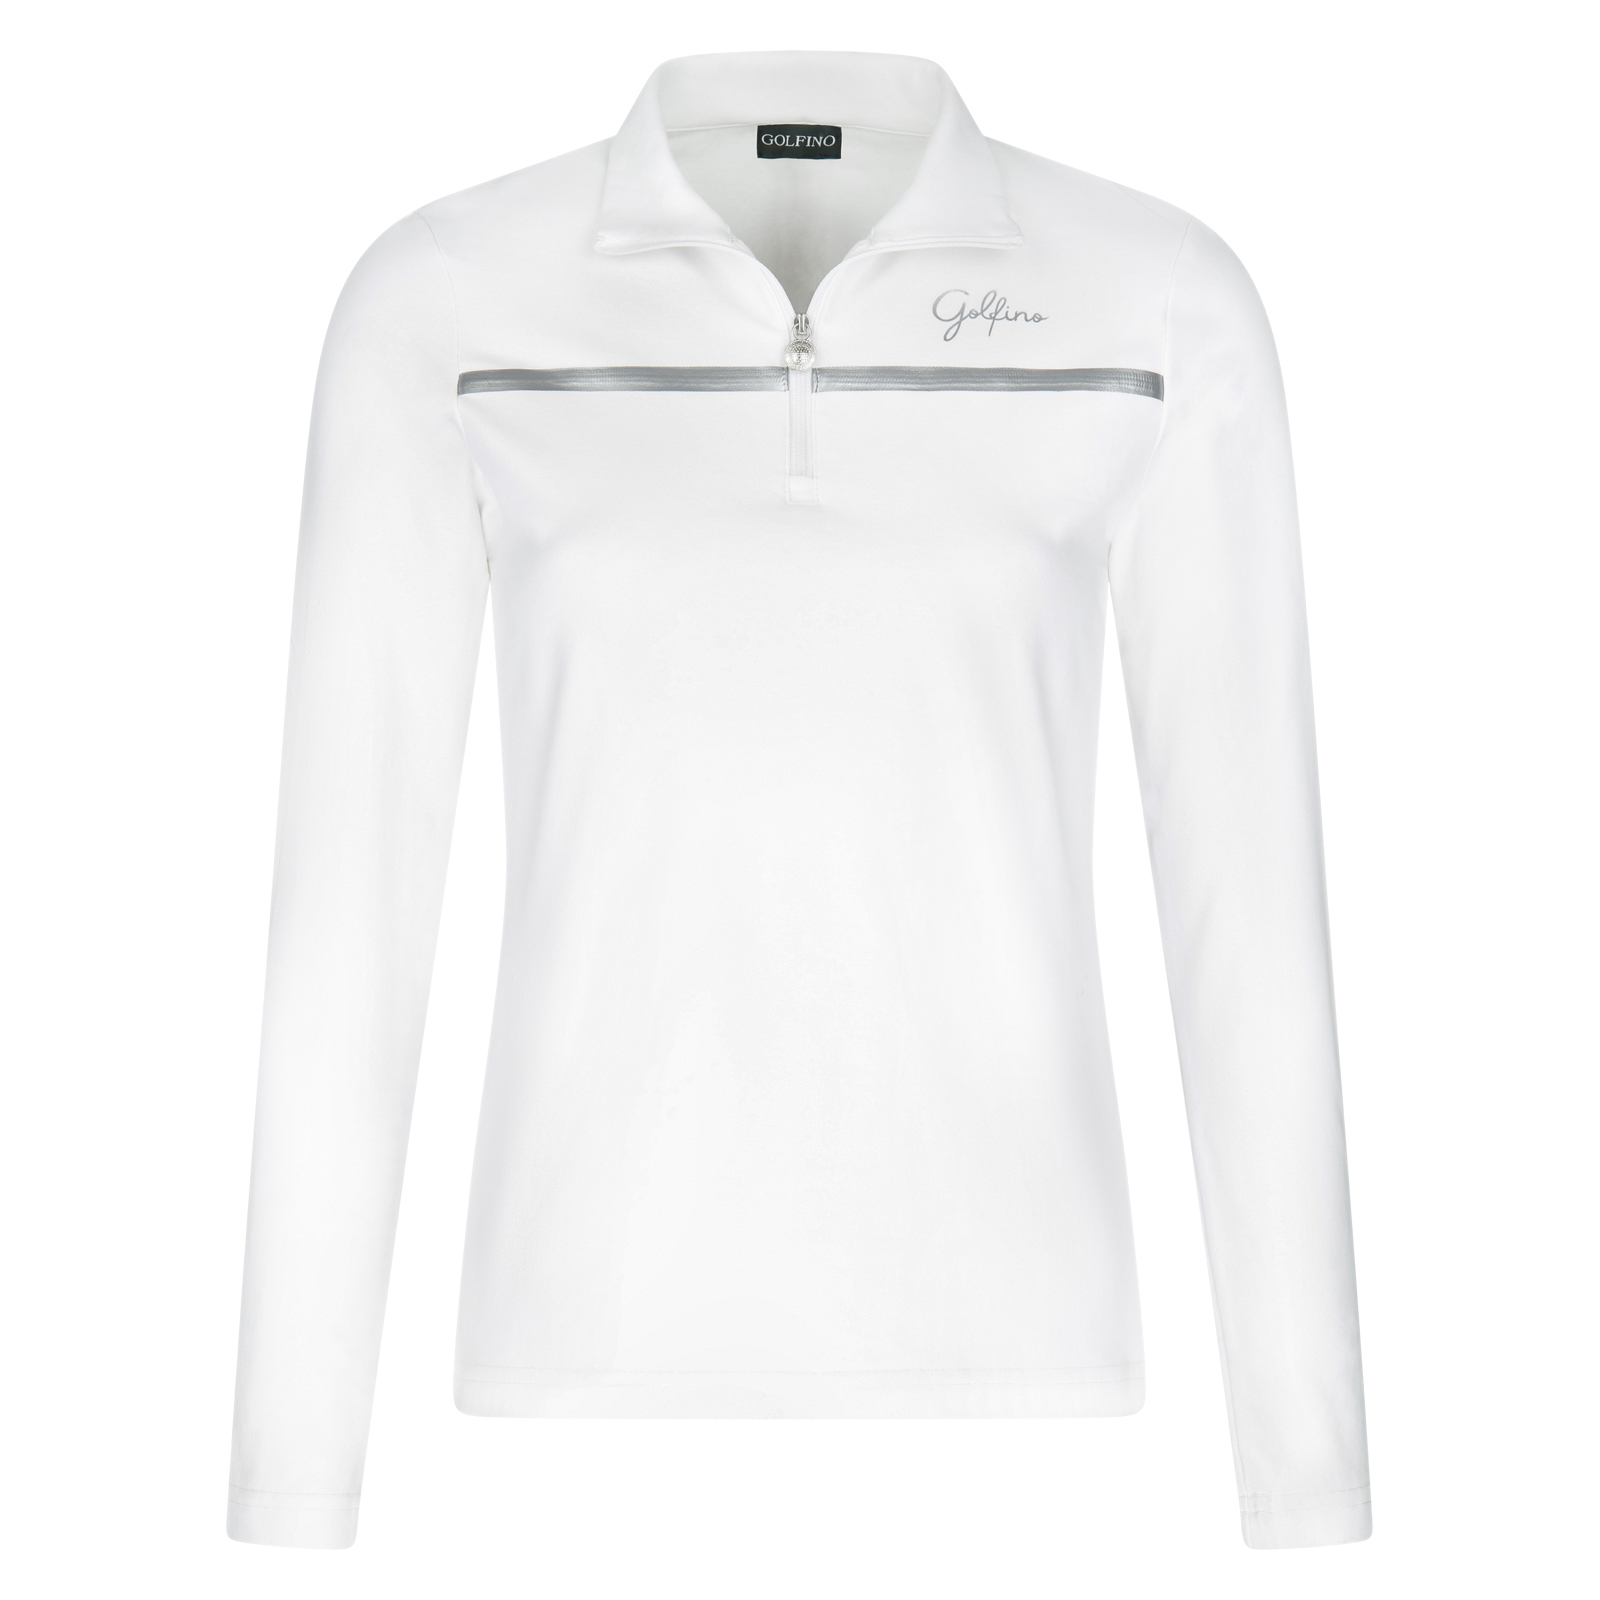 Ladies' moisture-wicking long-sleeved golf shirt with cold protection function